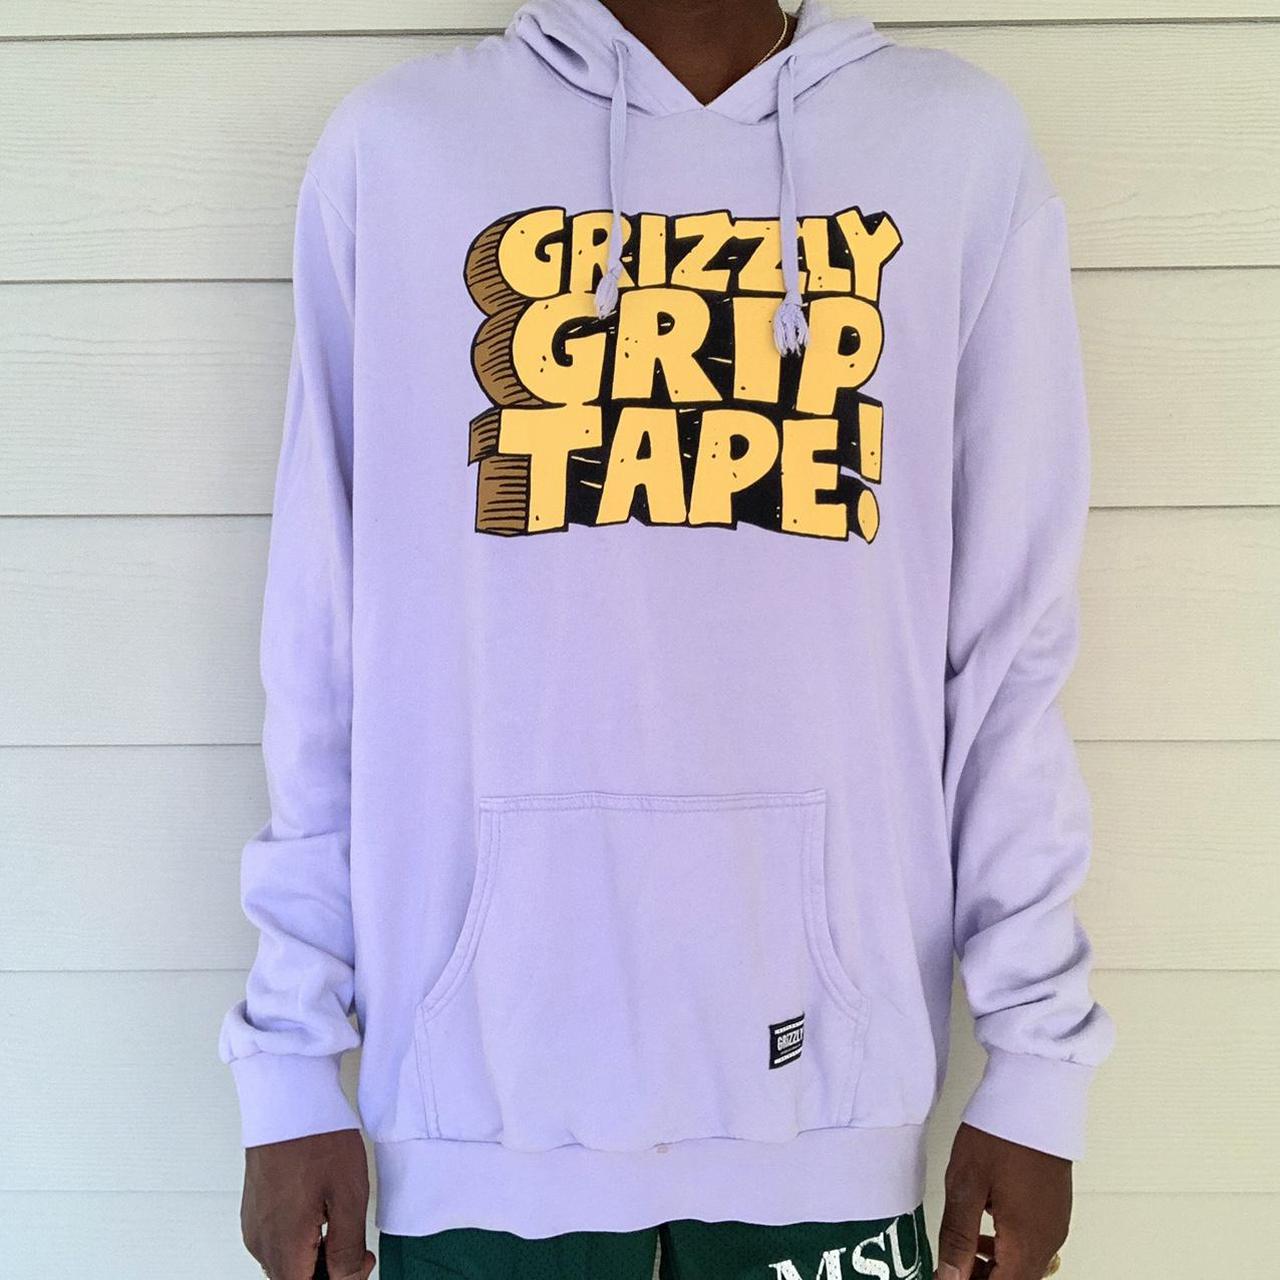 Product Image 1 - Lilac Grizzly Grip Tape Hoodie

Model